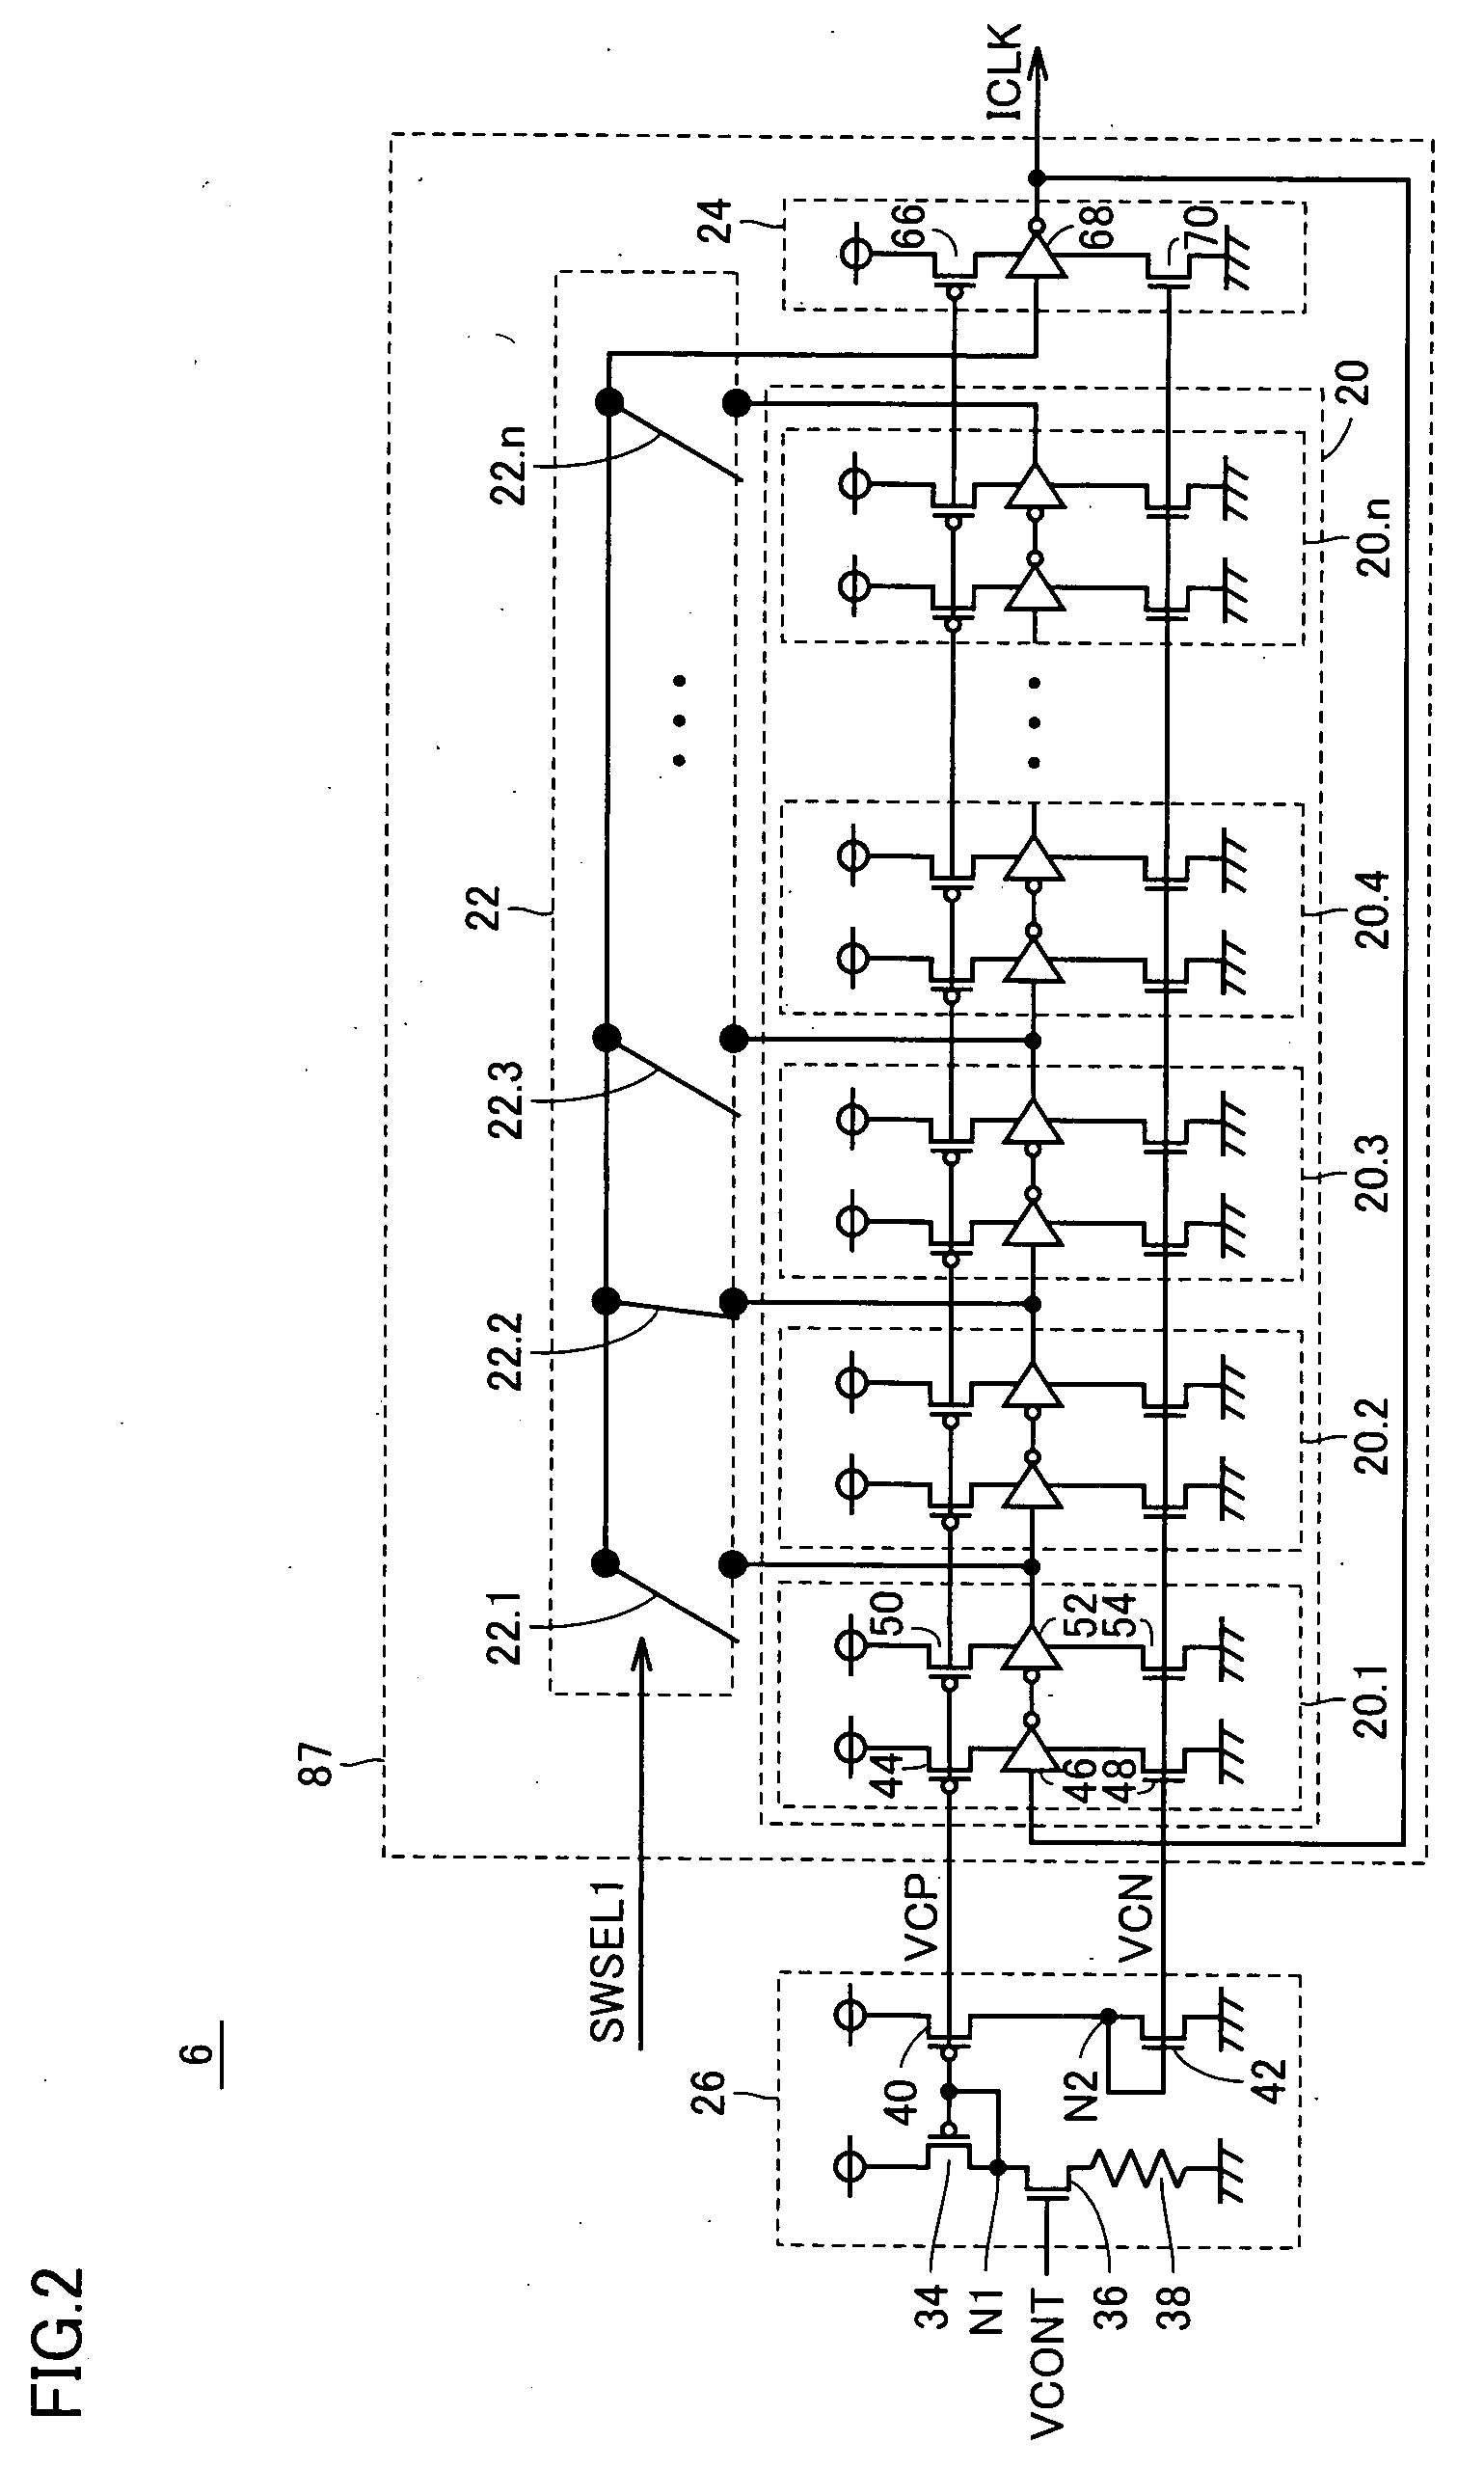 Synchronous clock generation circuit capable of ensuring wide lock-in range and attaining lower jitter